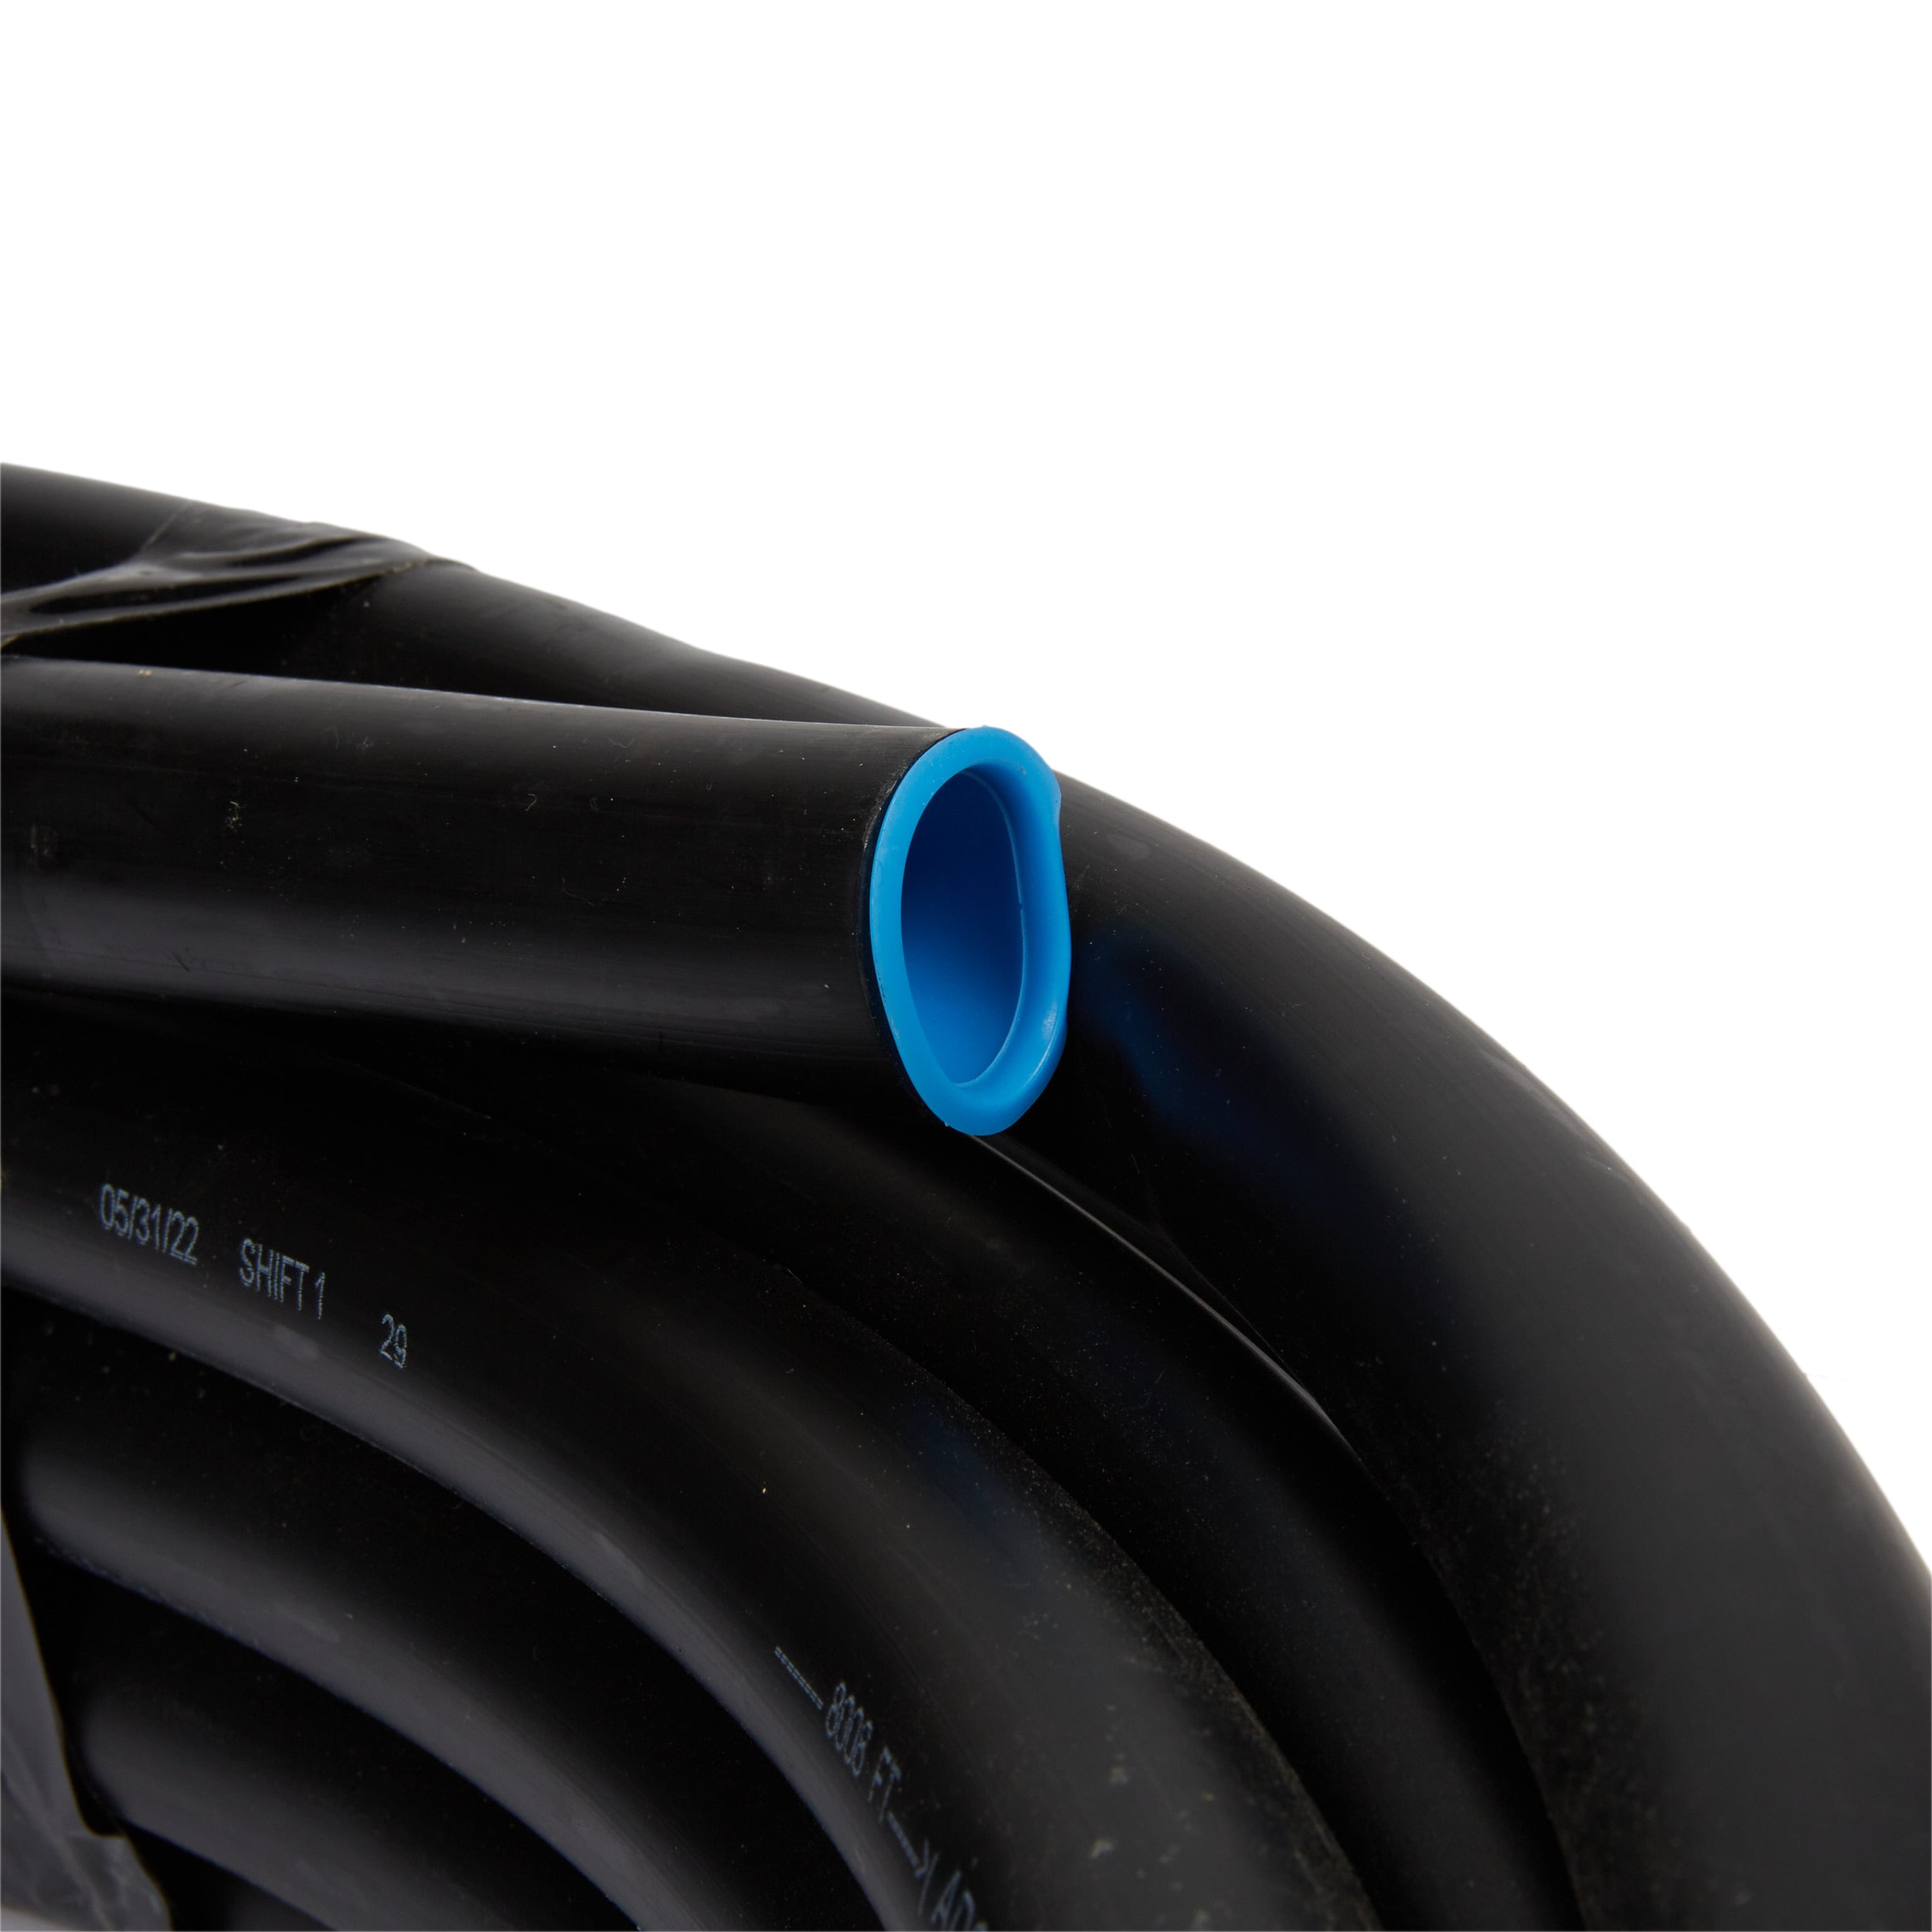 1-1/4 IPS SDR11 PE4710 Black Hdpe Pipe Straight Length Per Foot